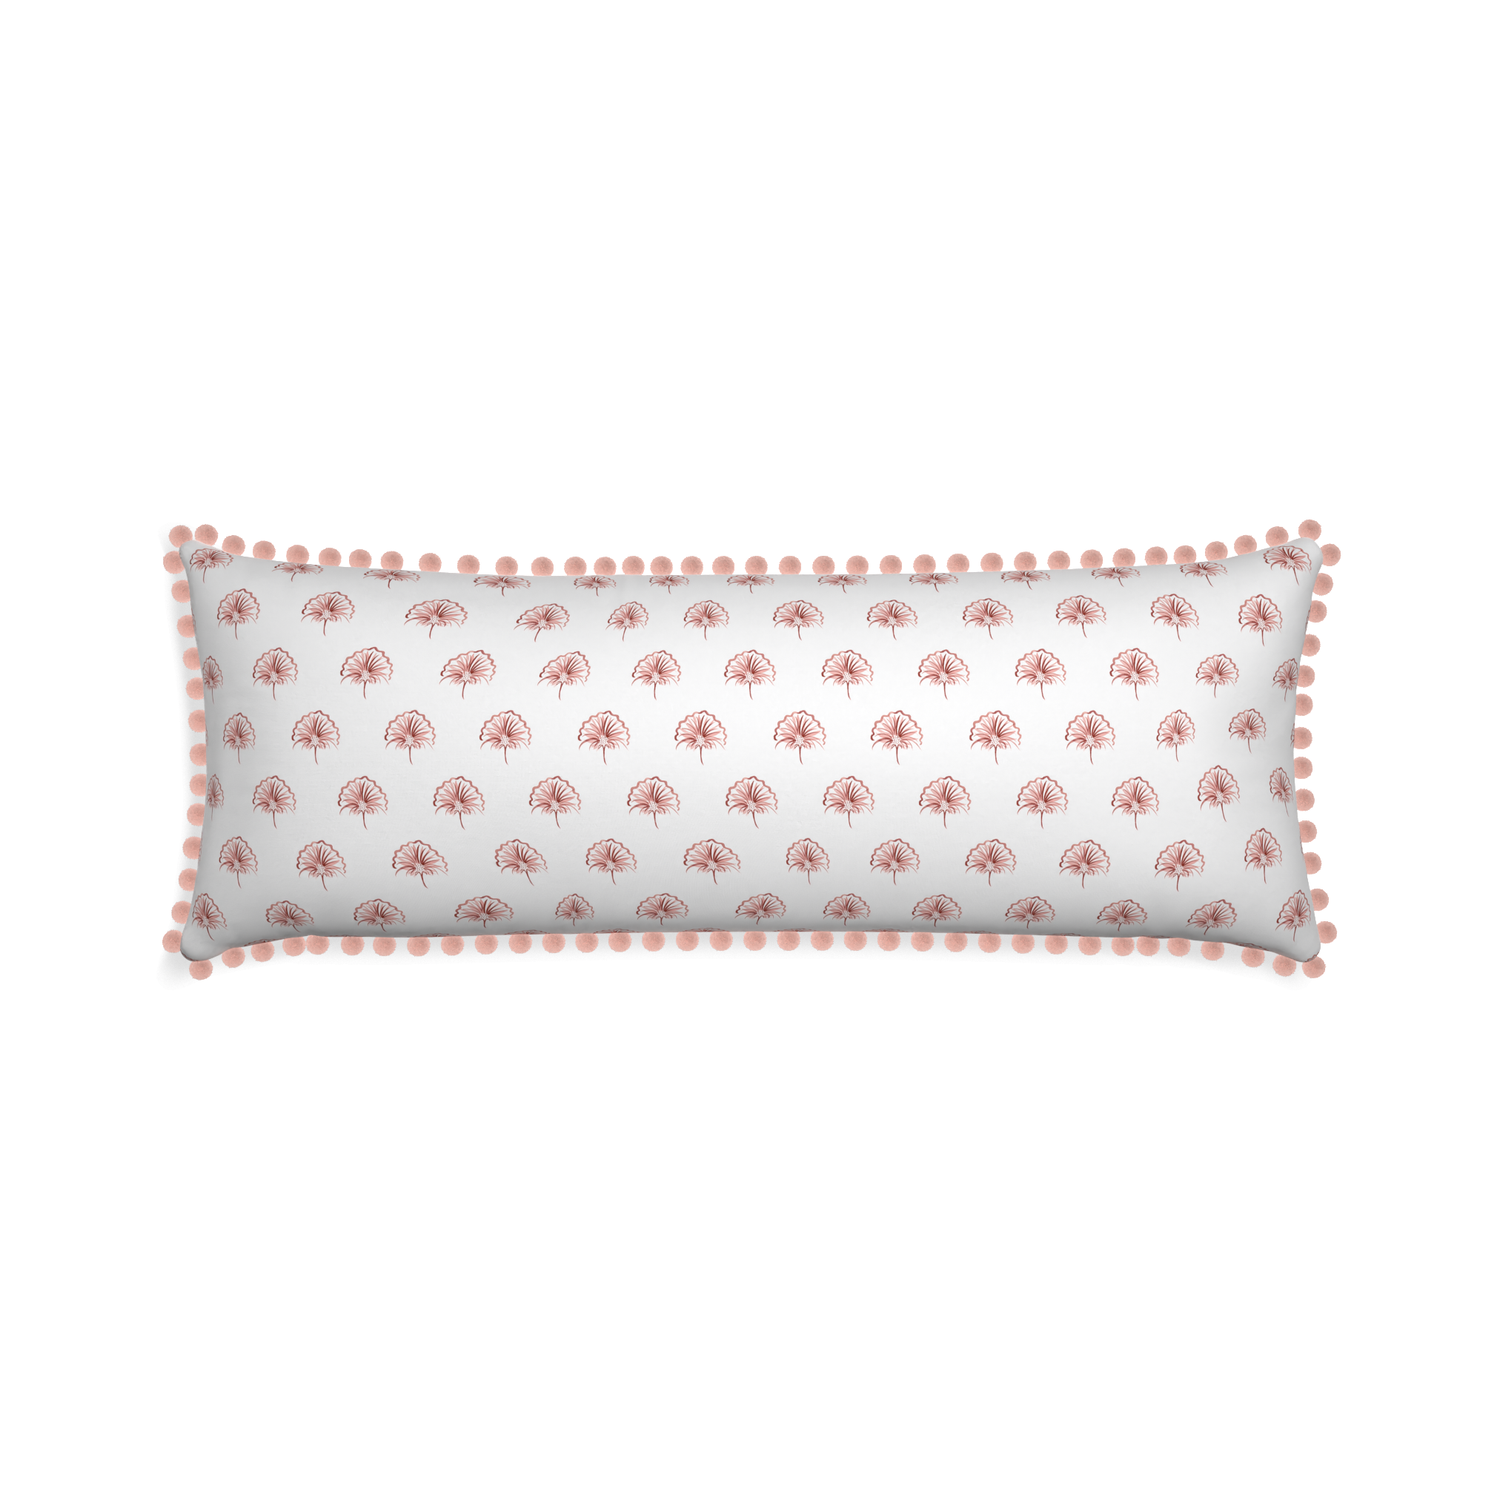 Xl-lumbar penelope rose custom floral pinkpillow with rose pom pom on white background